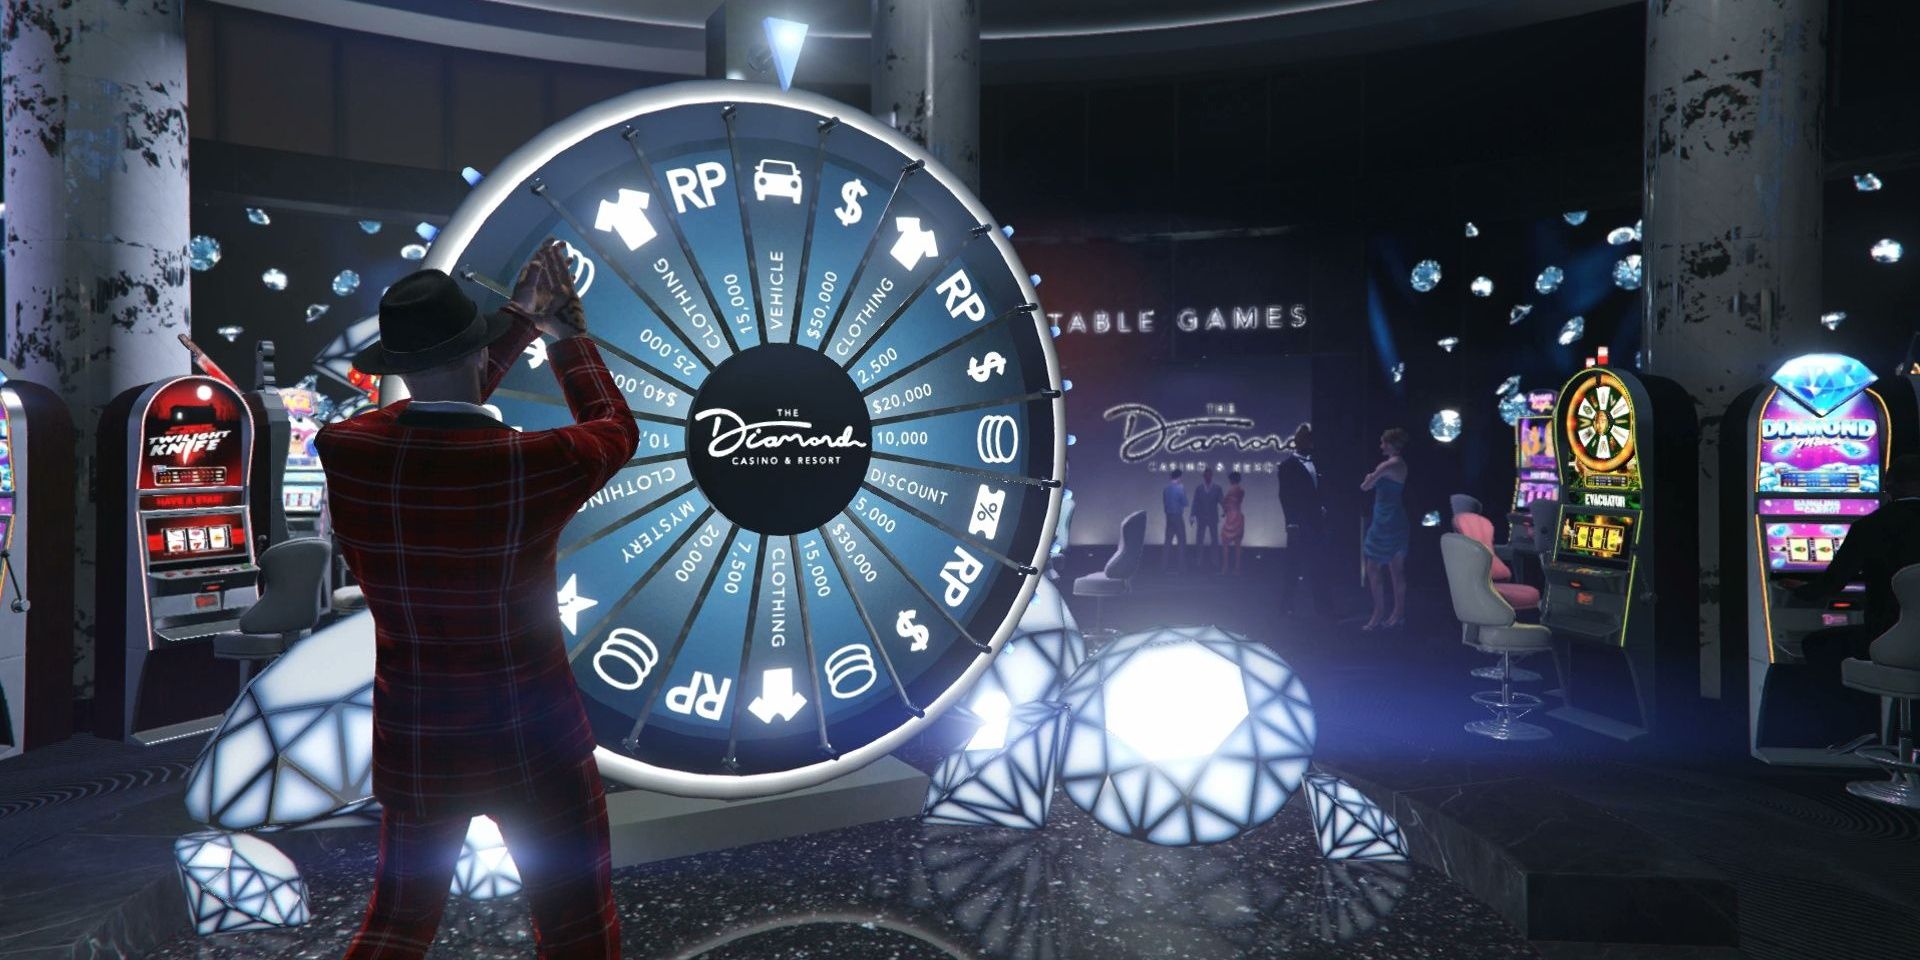 A screenshot showing a player spinnig the lucky wheel in GTA Online